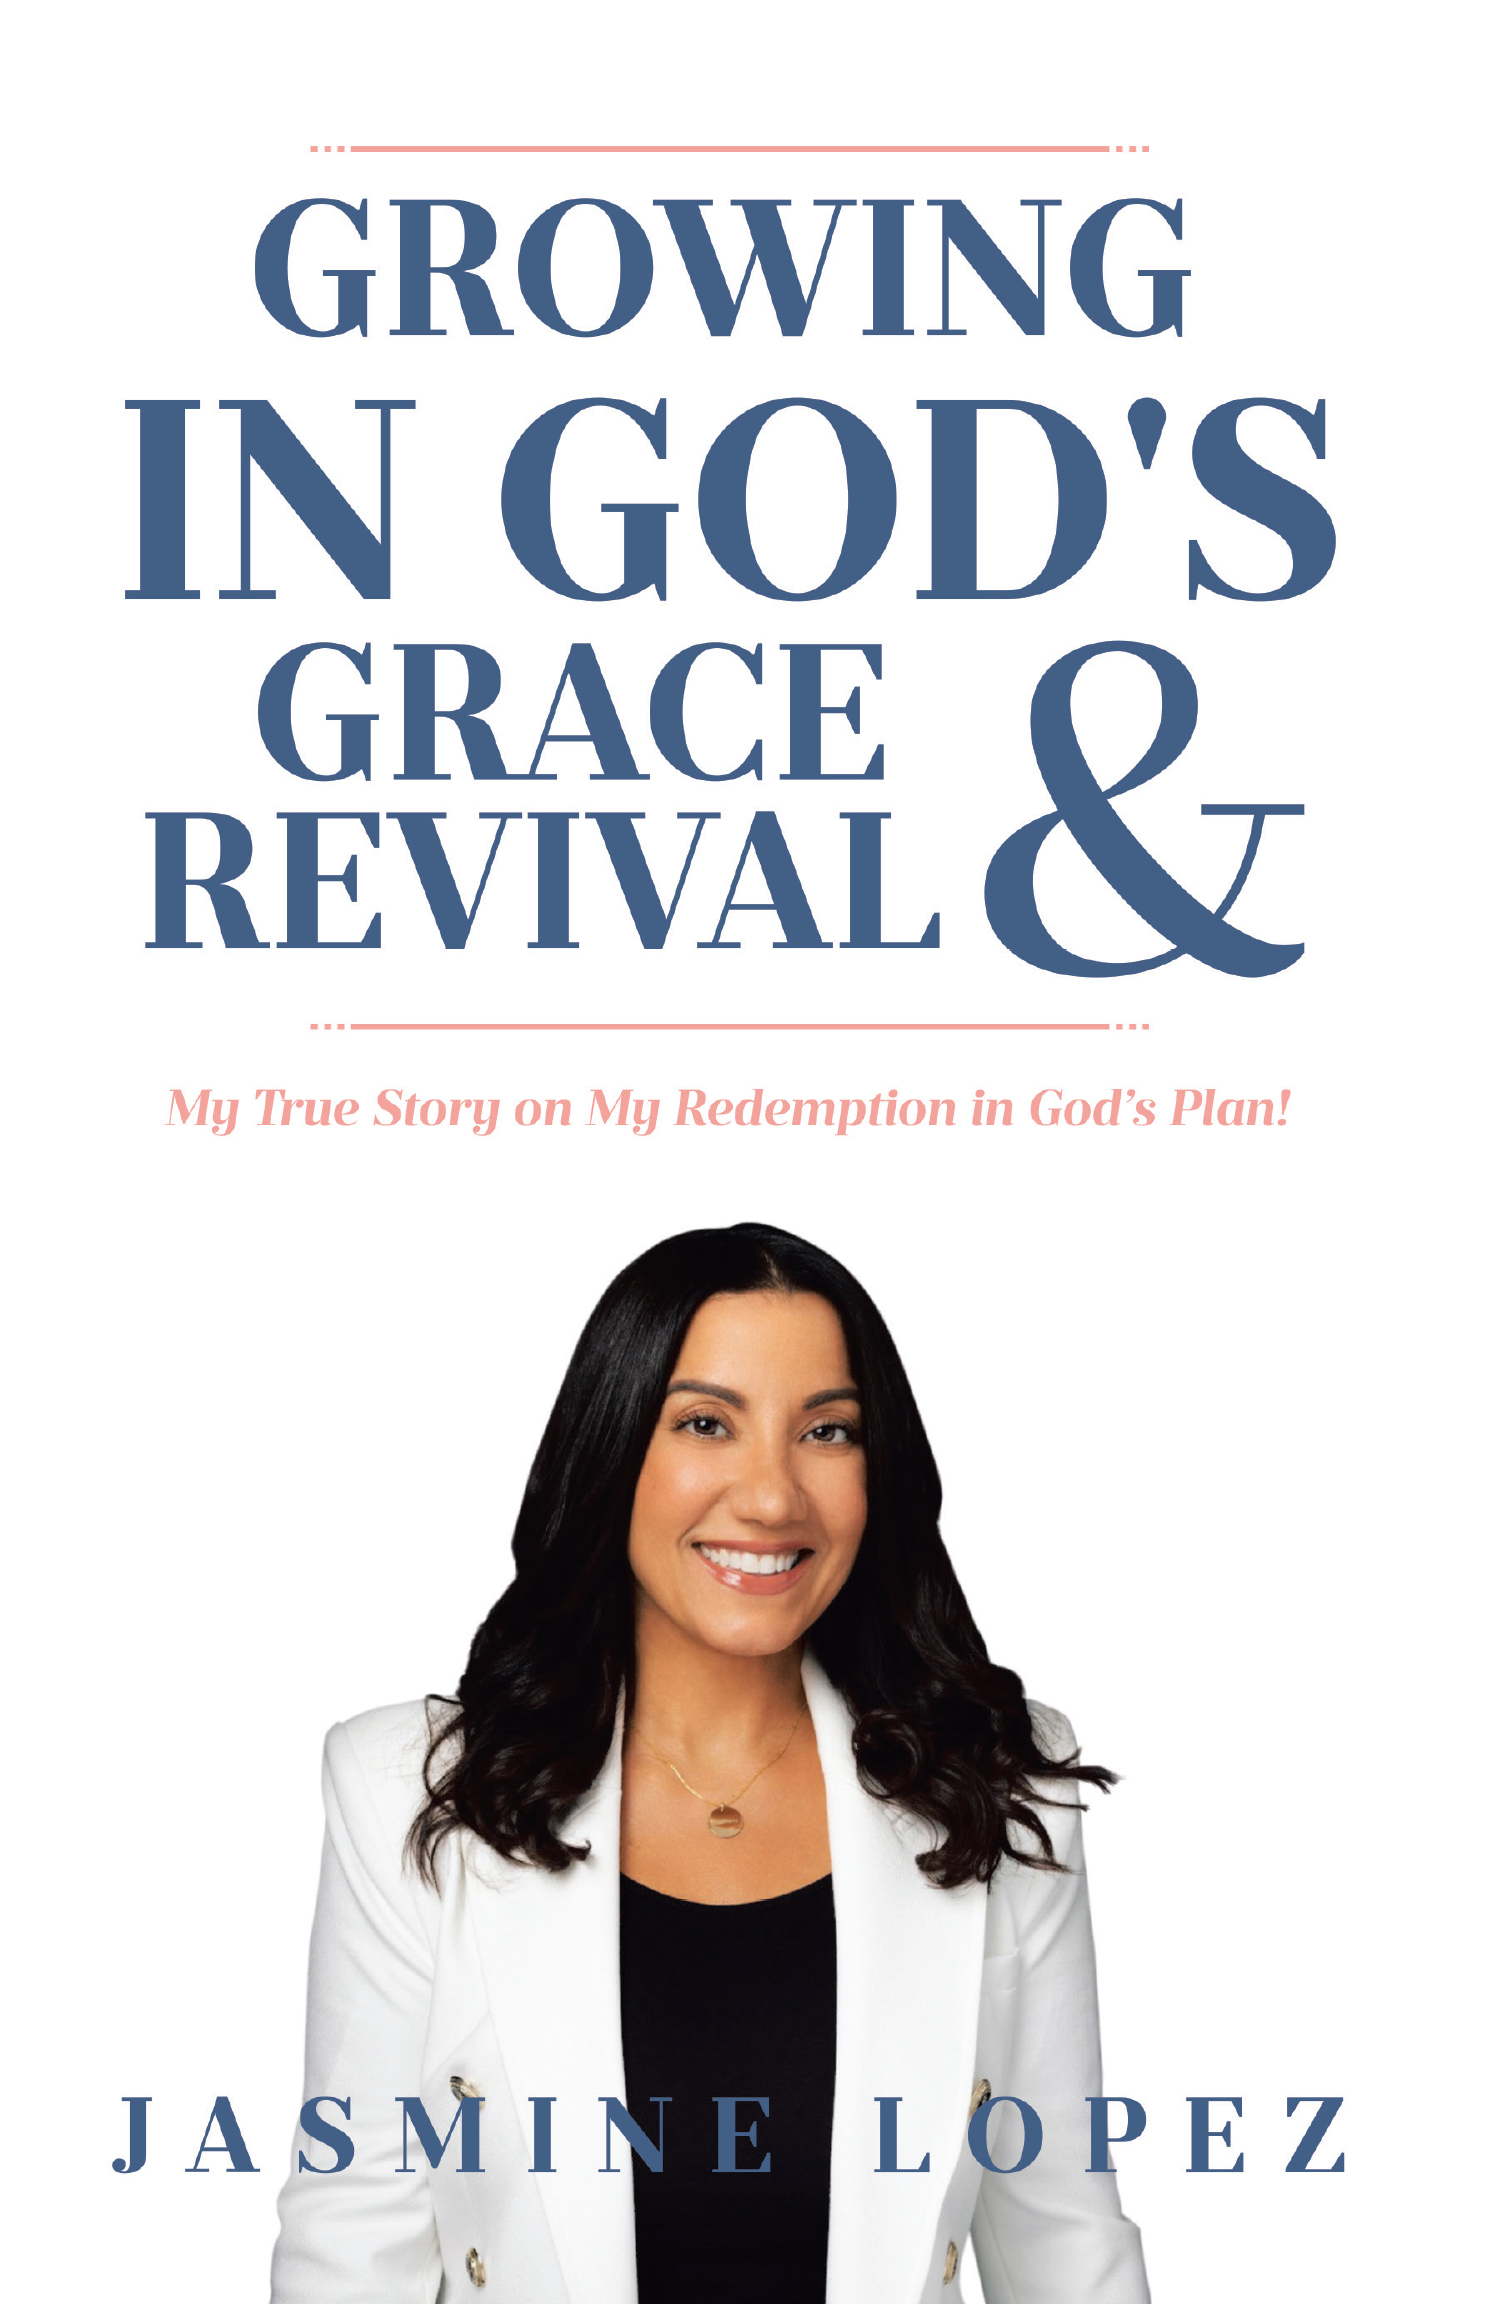 Author Jasmine Lopez's New Book, "Growing in God's Grace & Revival," Describes the Author's Personal Journey of Transformation in Her Faith and Redemption Through God